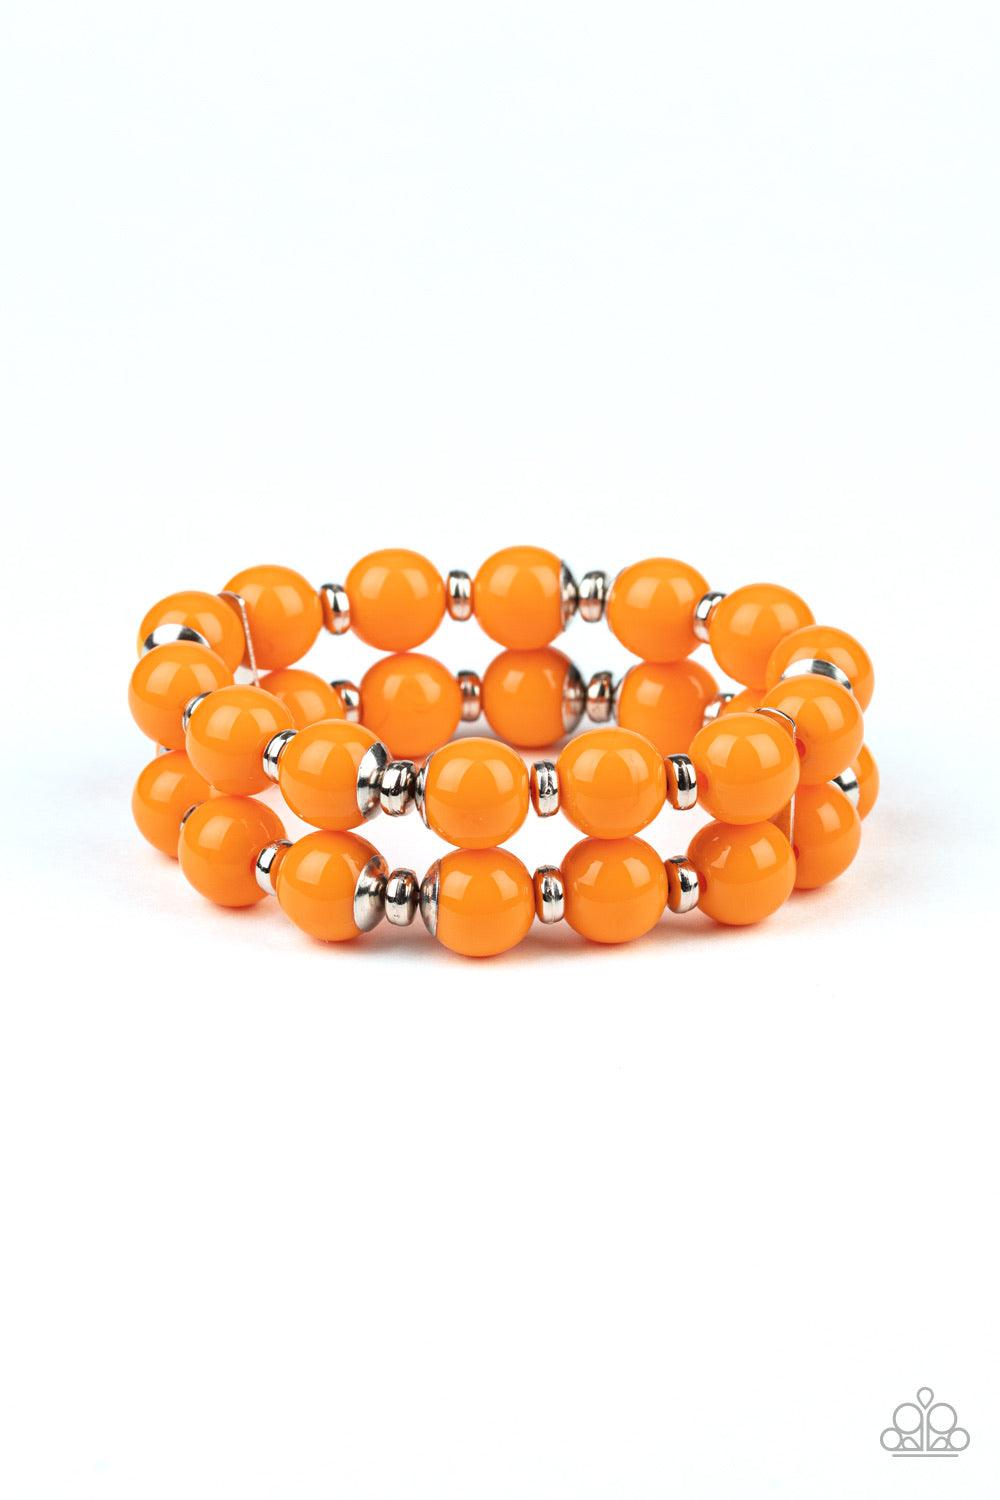 Paparazzi Accessories Bubble Blast Off - Orange Connected together by two dainty silver fittings, a bubbly collection of Saffron beads and shiny silver accents are threaded along two stretchy bands around the wrist for a bold pop of color. Jewelry